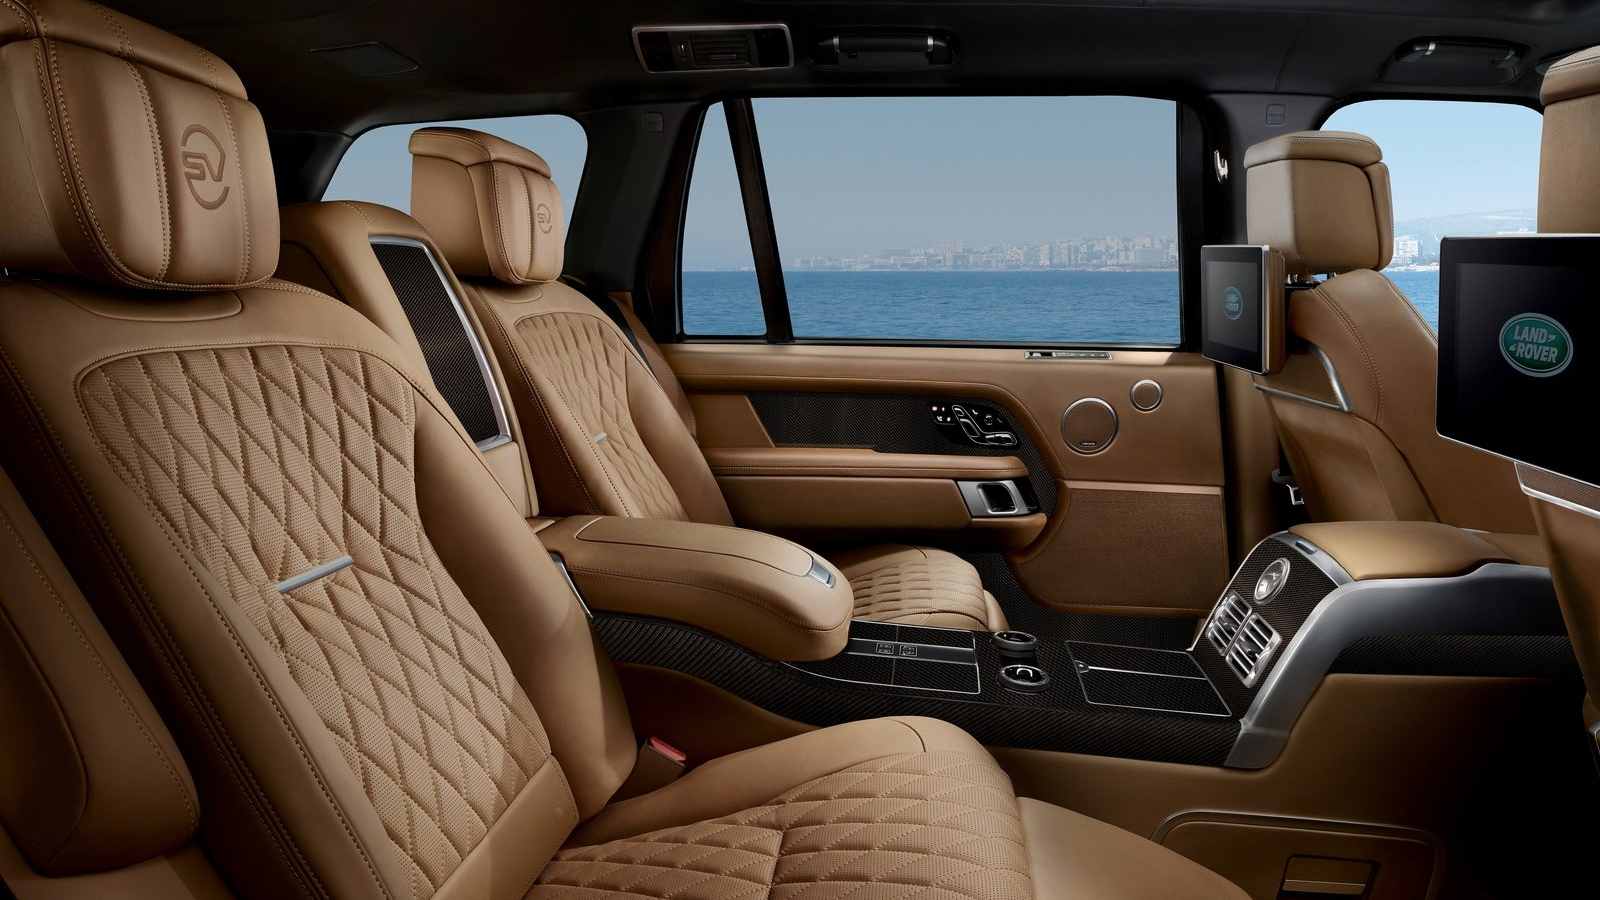 The long-wheelbase version is available with aircraft-style reclining rear seats. Image: Land Rover